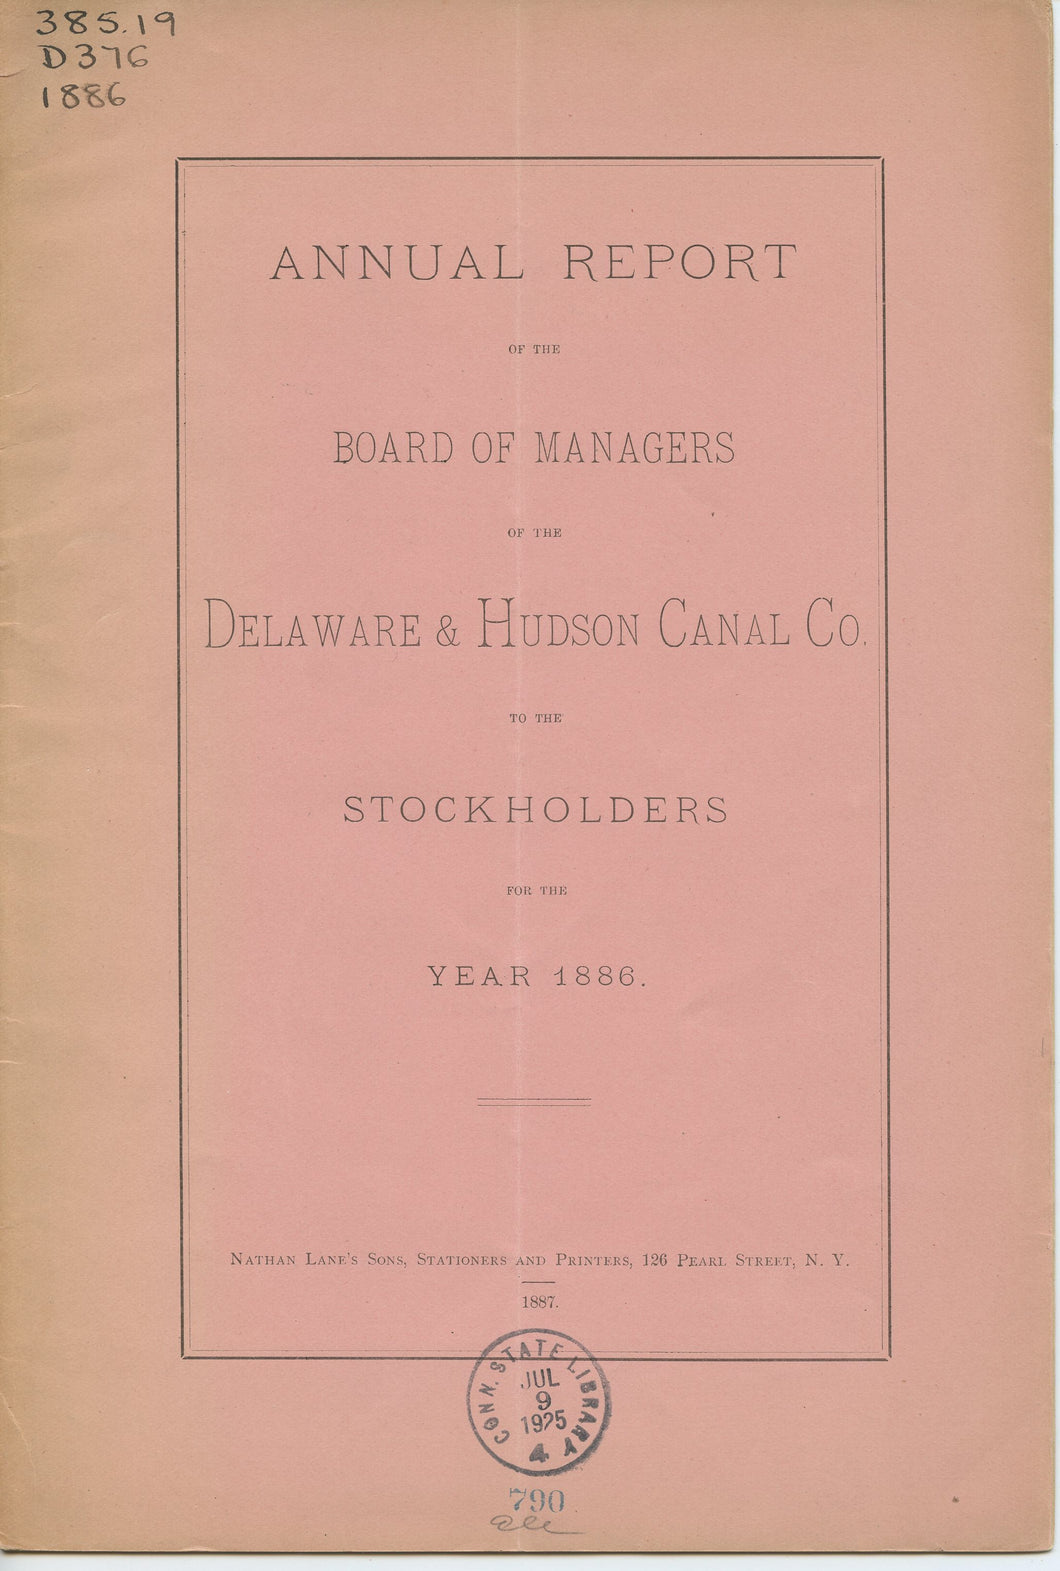 Annual Report of the Board of Managers of the Delaware & Hudson Canal Co. to the Stockholders, for the Year 1886